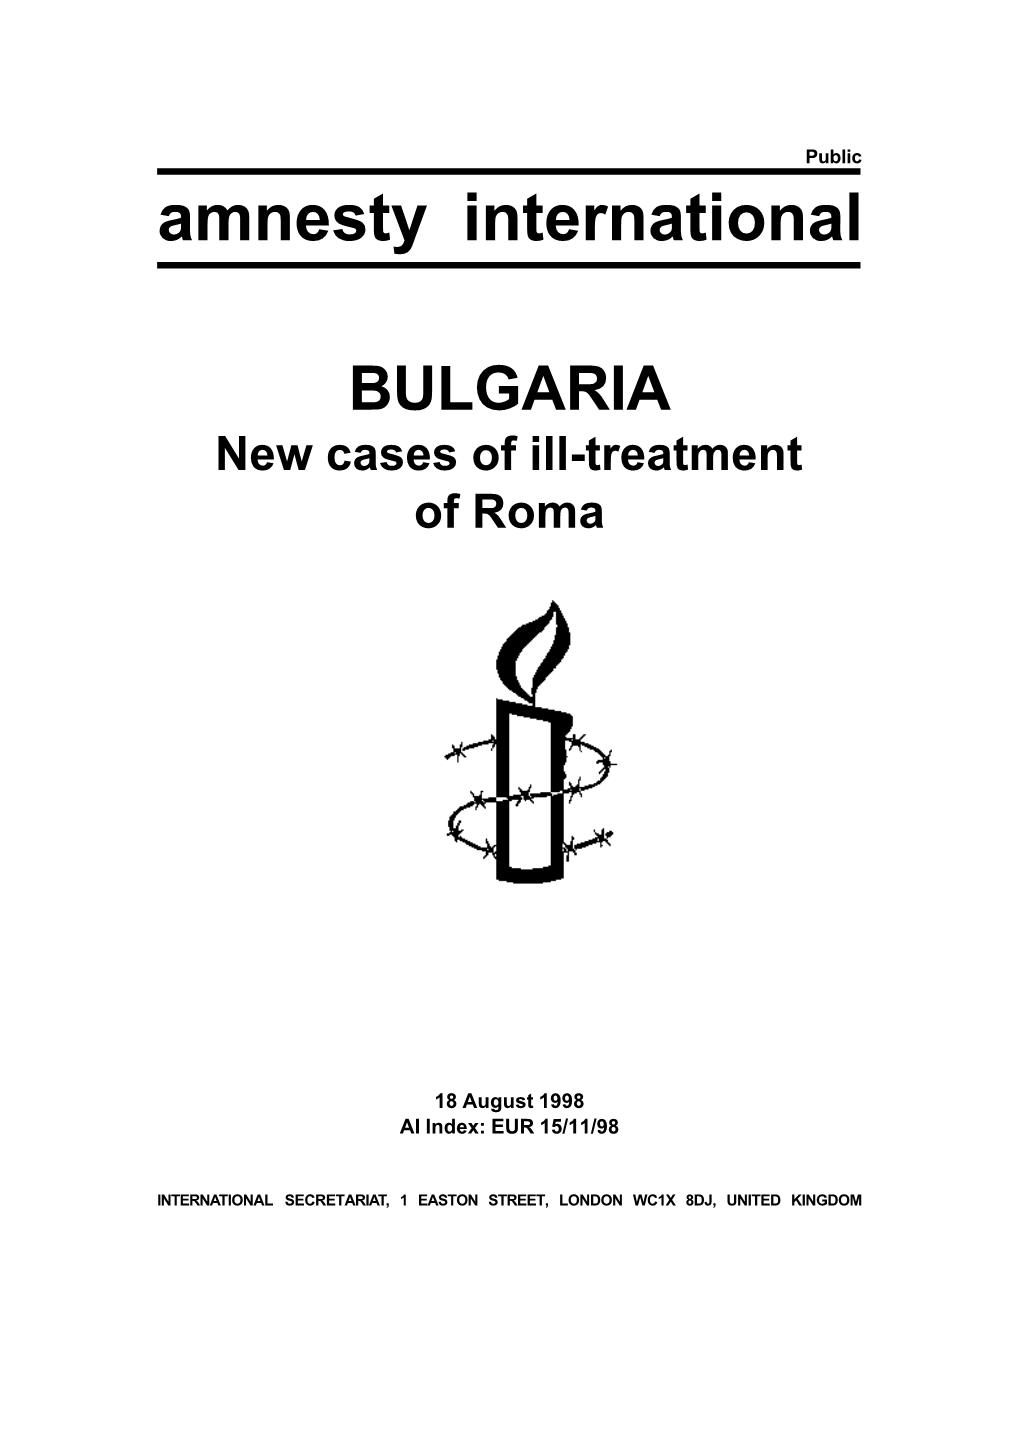 EUR 15/11/98 Bulgaria: New Cases of Ill-Treatment of Roma